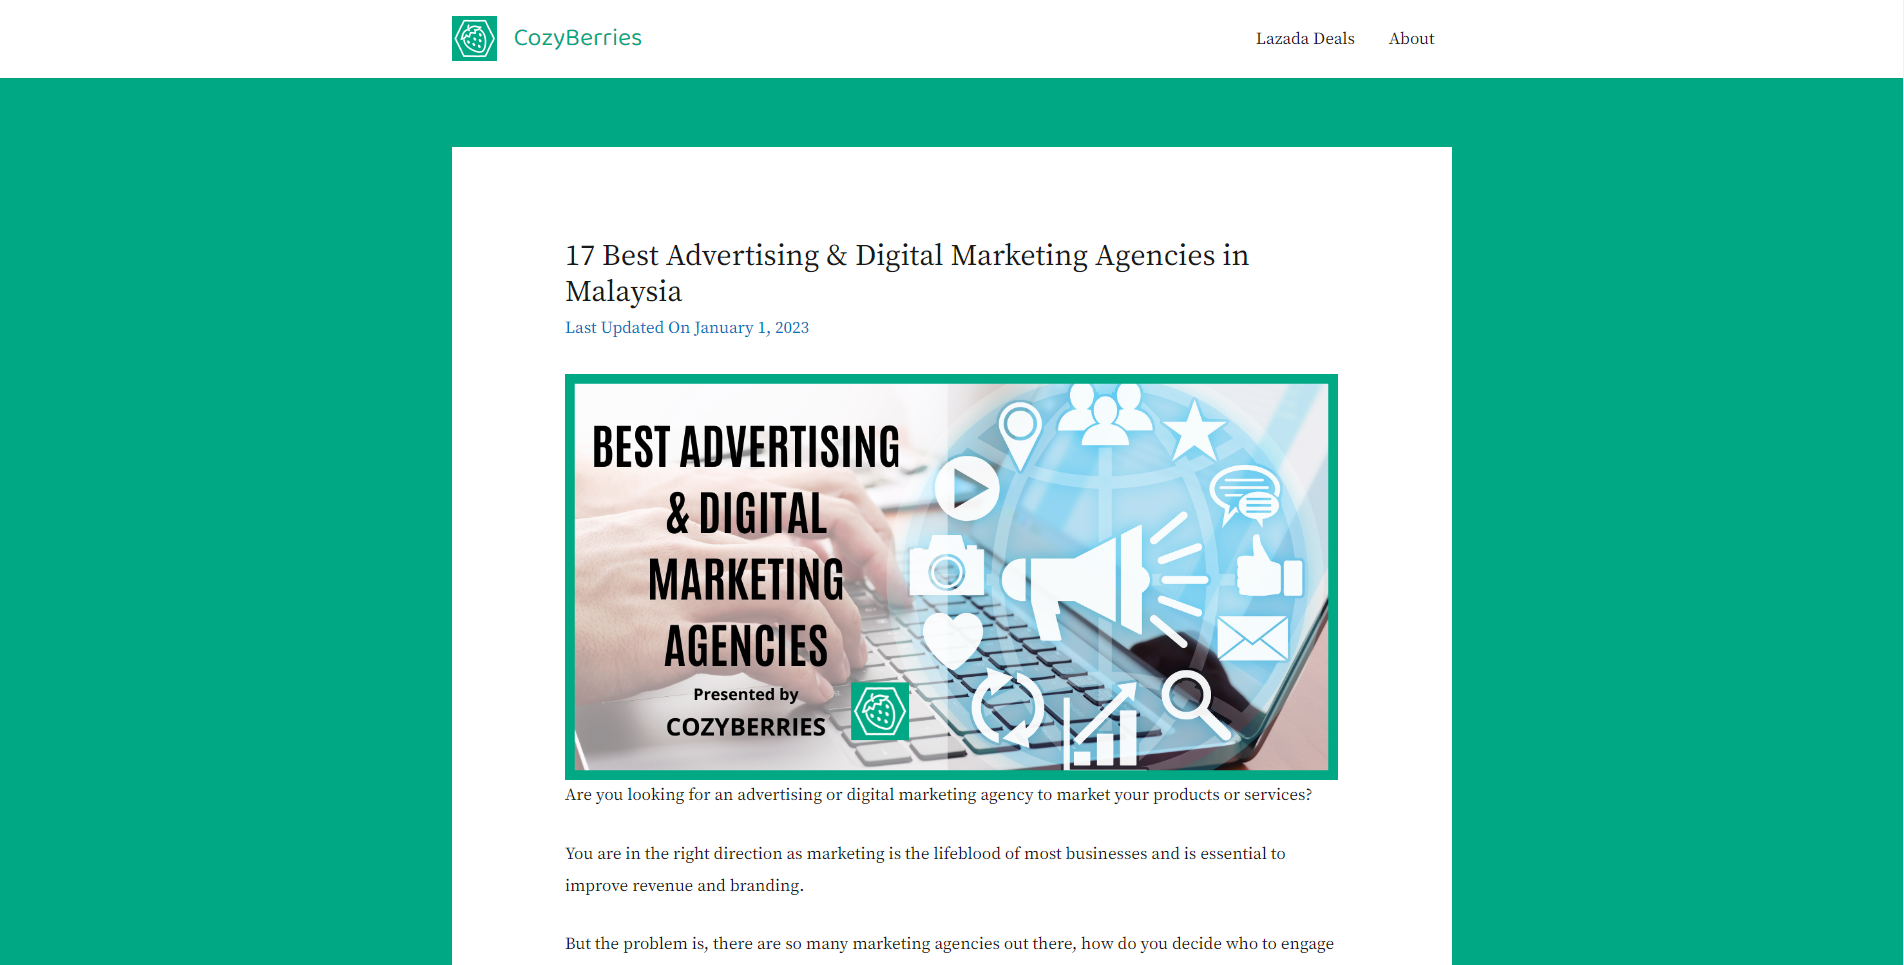 We got listed as the “Best Advertising & Digital Marketing agencies in Malaysia”!